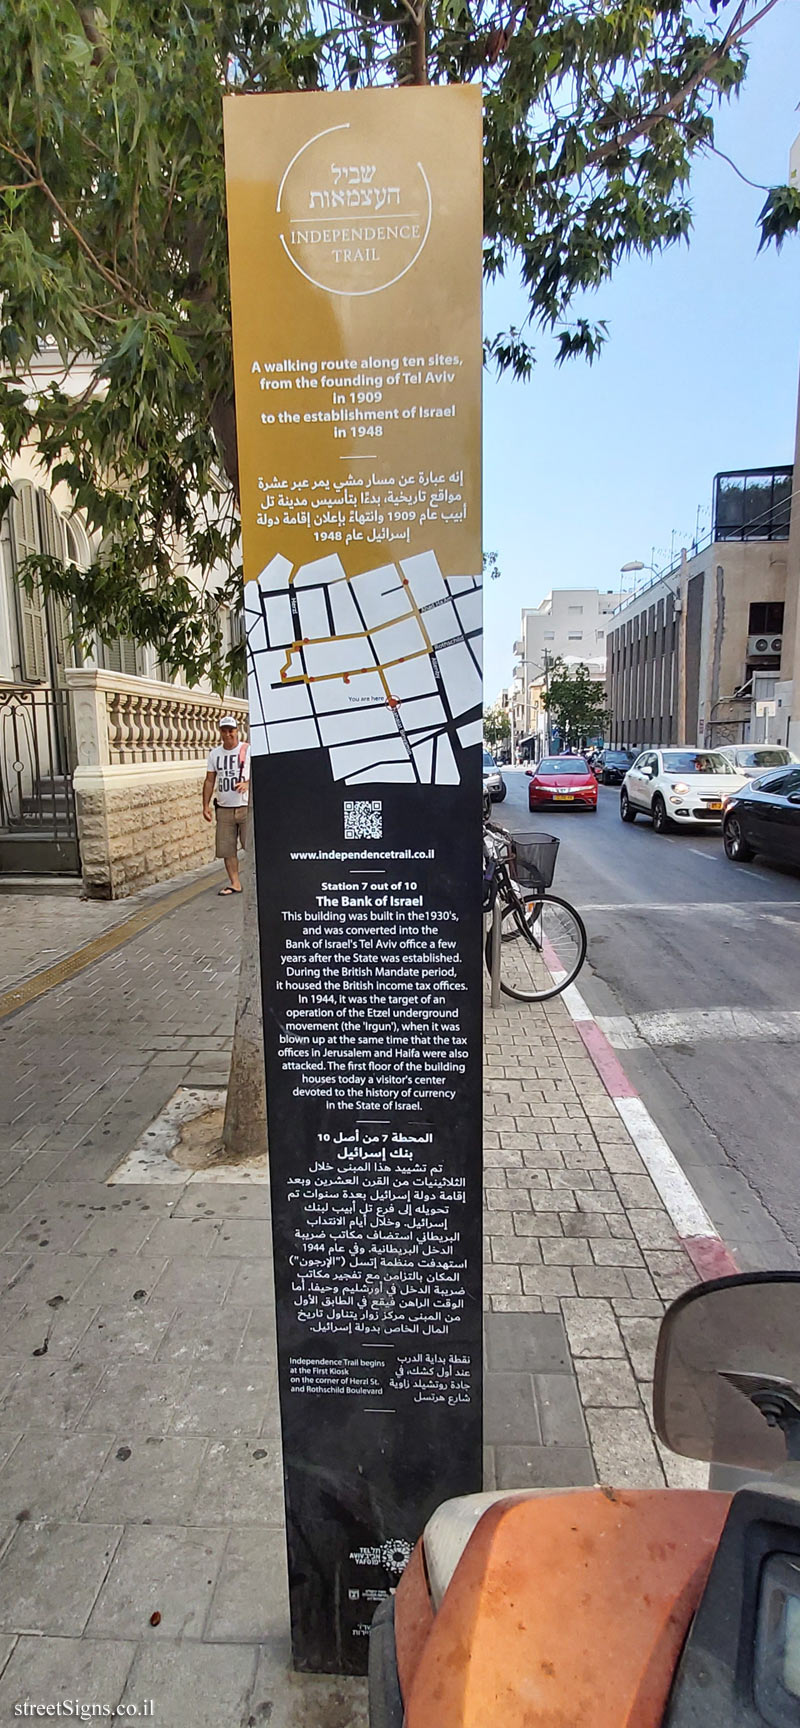 Tel Aviv - Independence Trail - Bank of Israel - Information (English and Arabic)